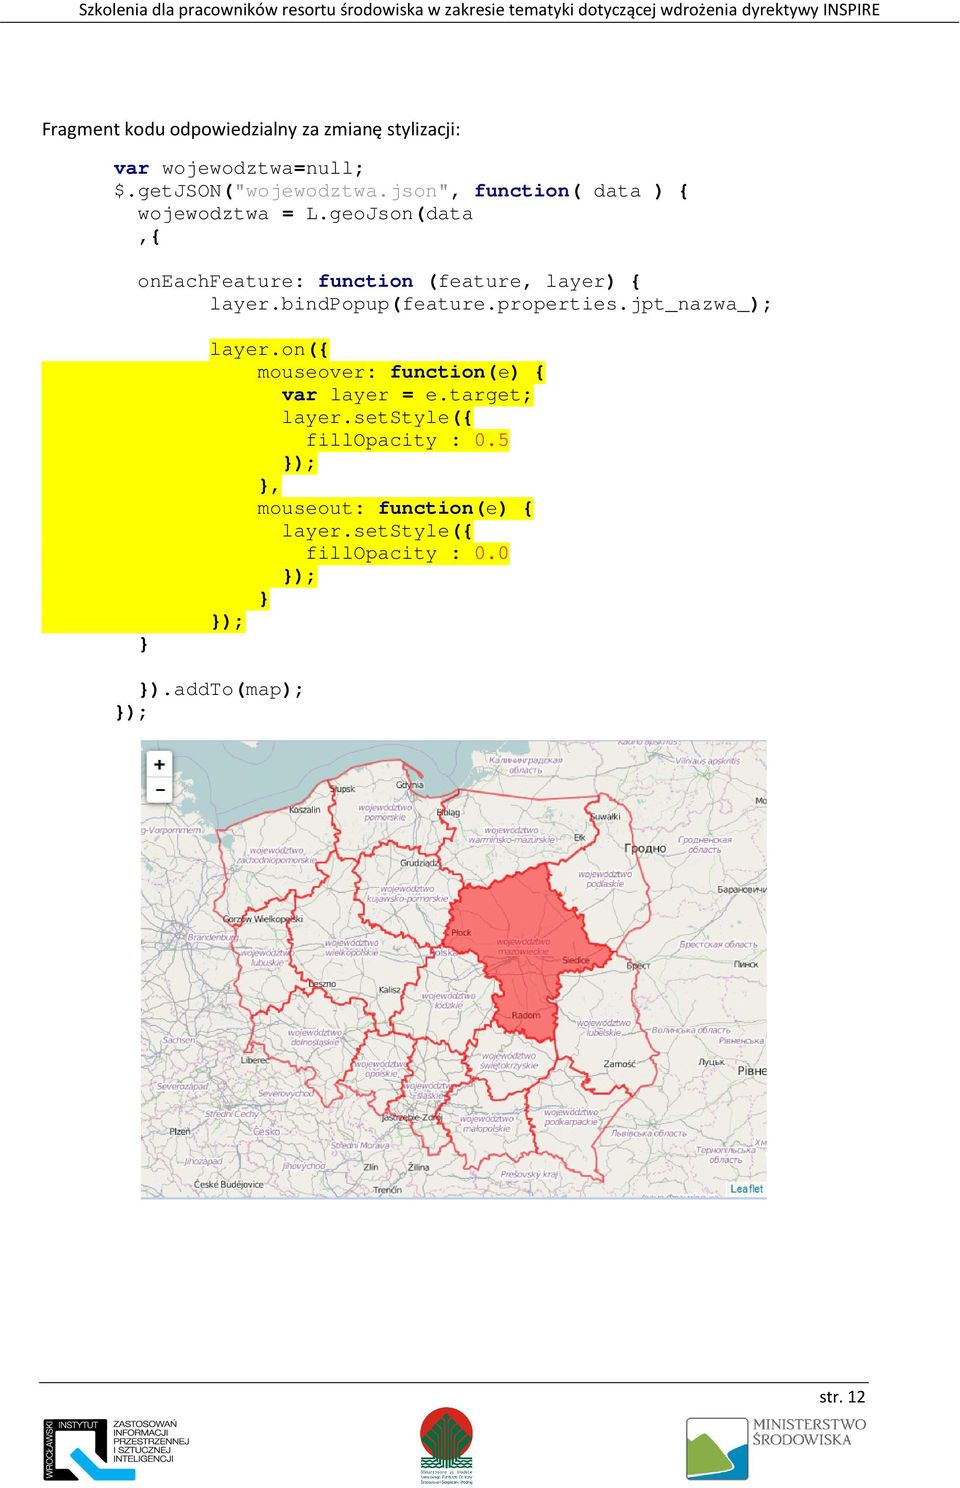 geoJson(data,{ oneachfeature: function (feature, layer) { layer.bindpopup(feature.properties.